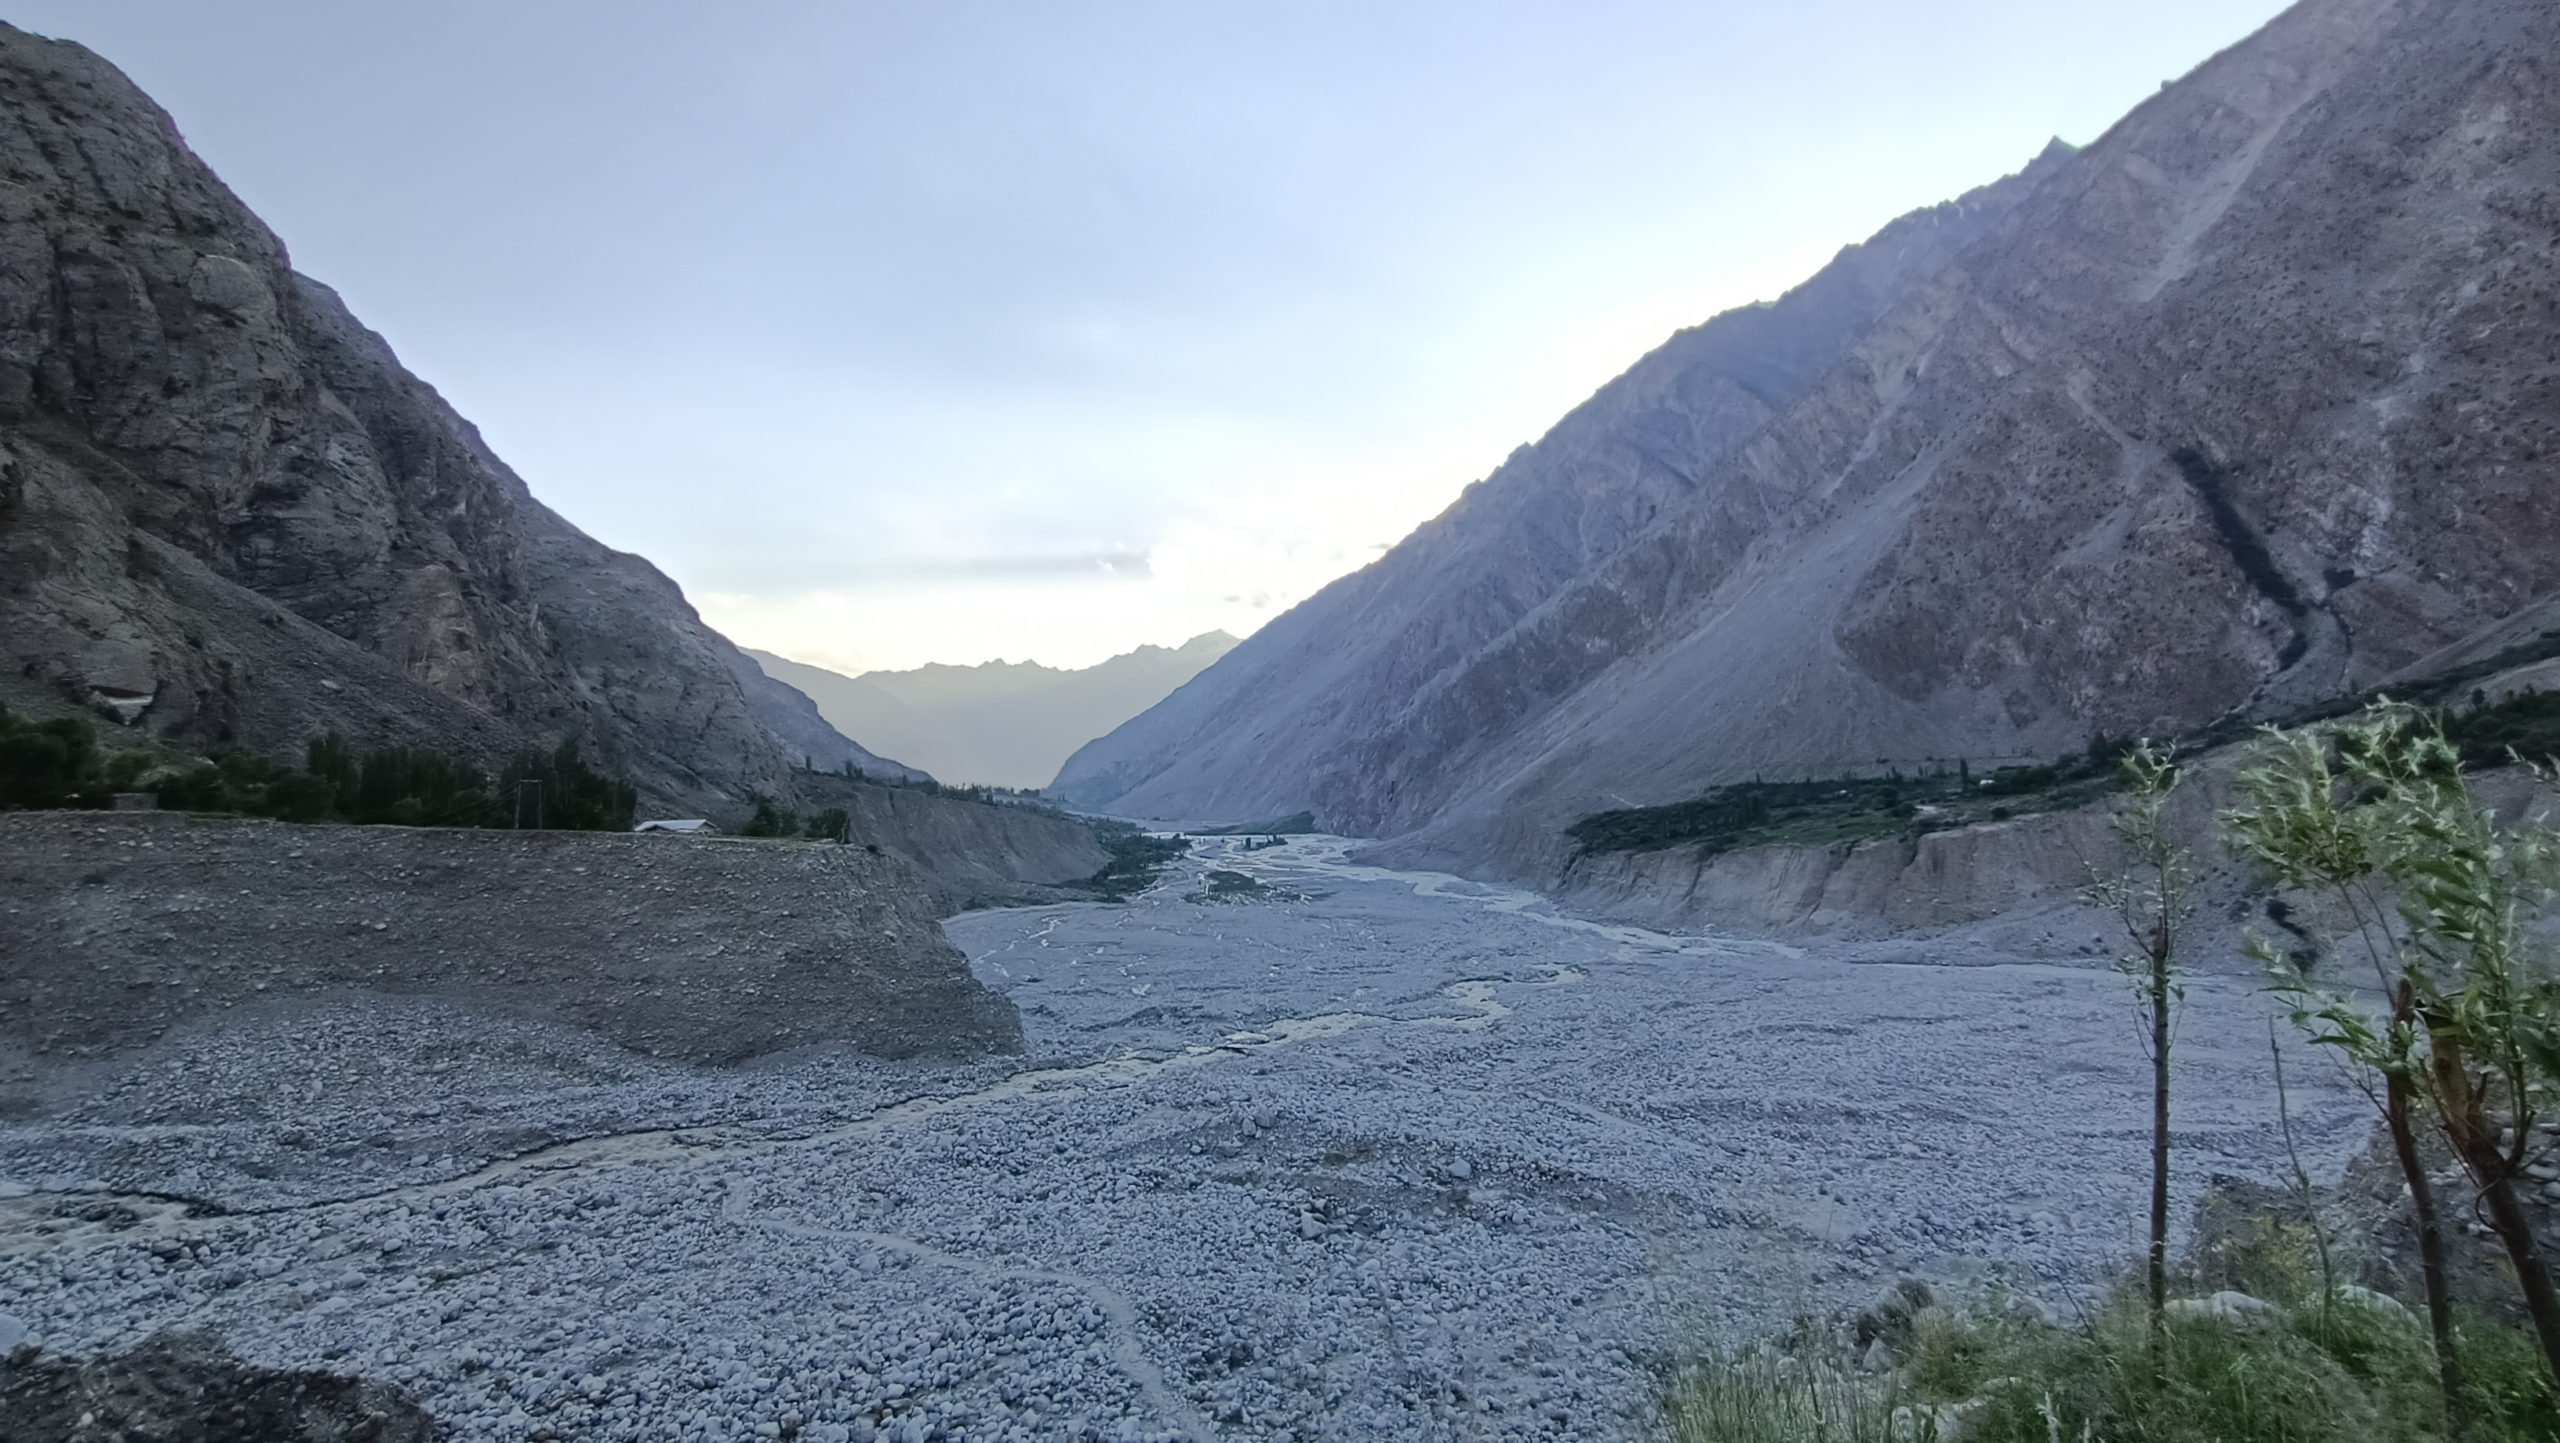 Aftermath of the glacial lake outburst flood at Badswat, Pakistan